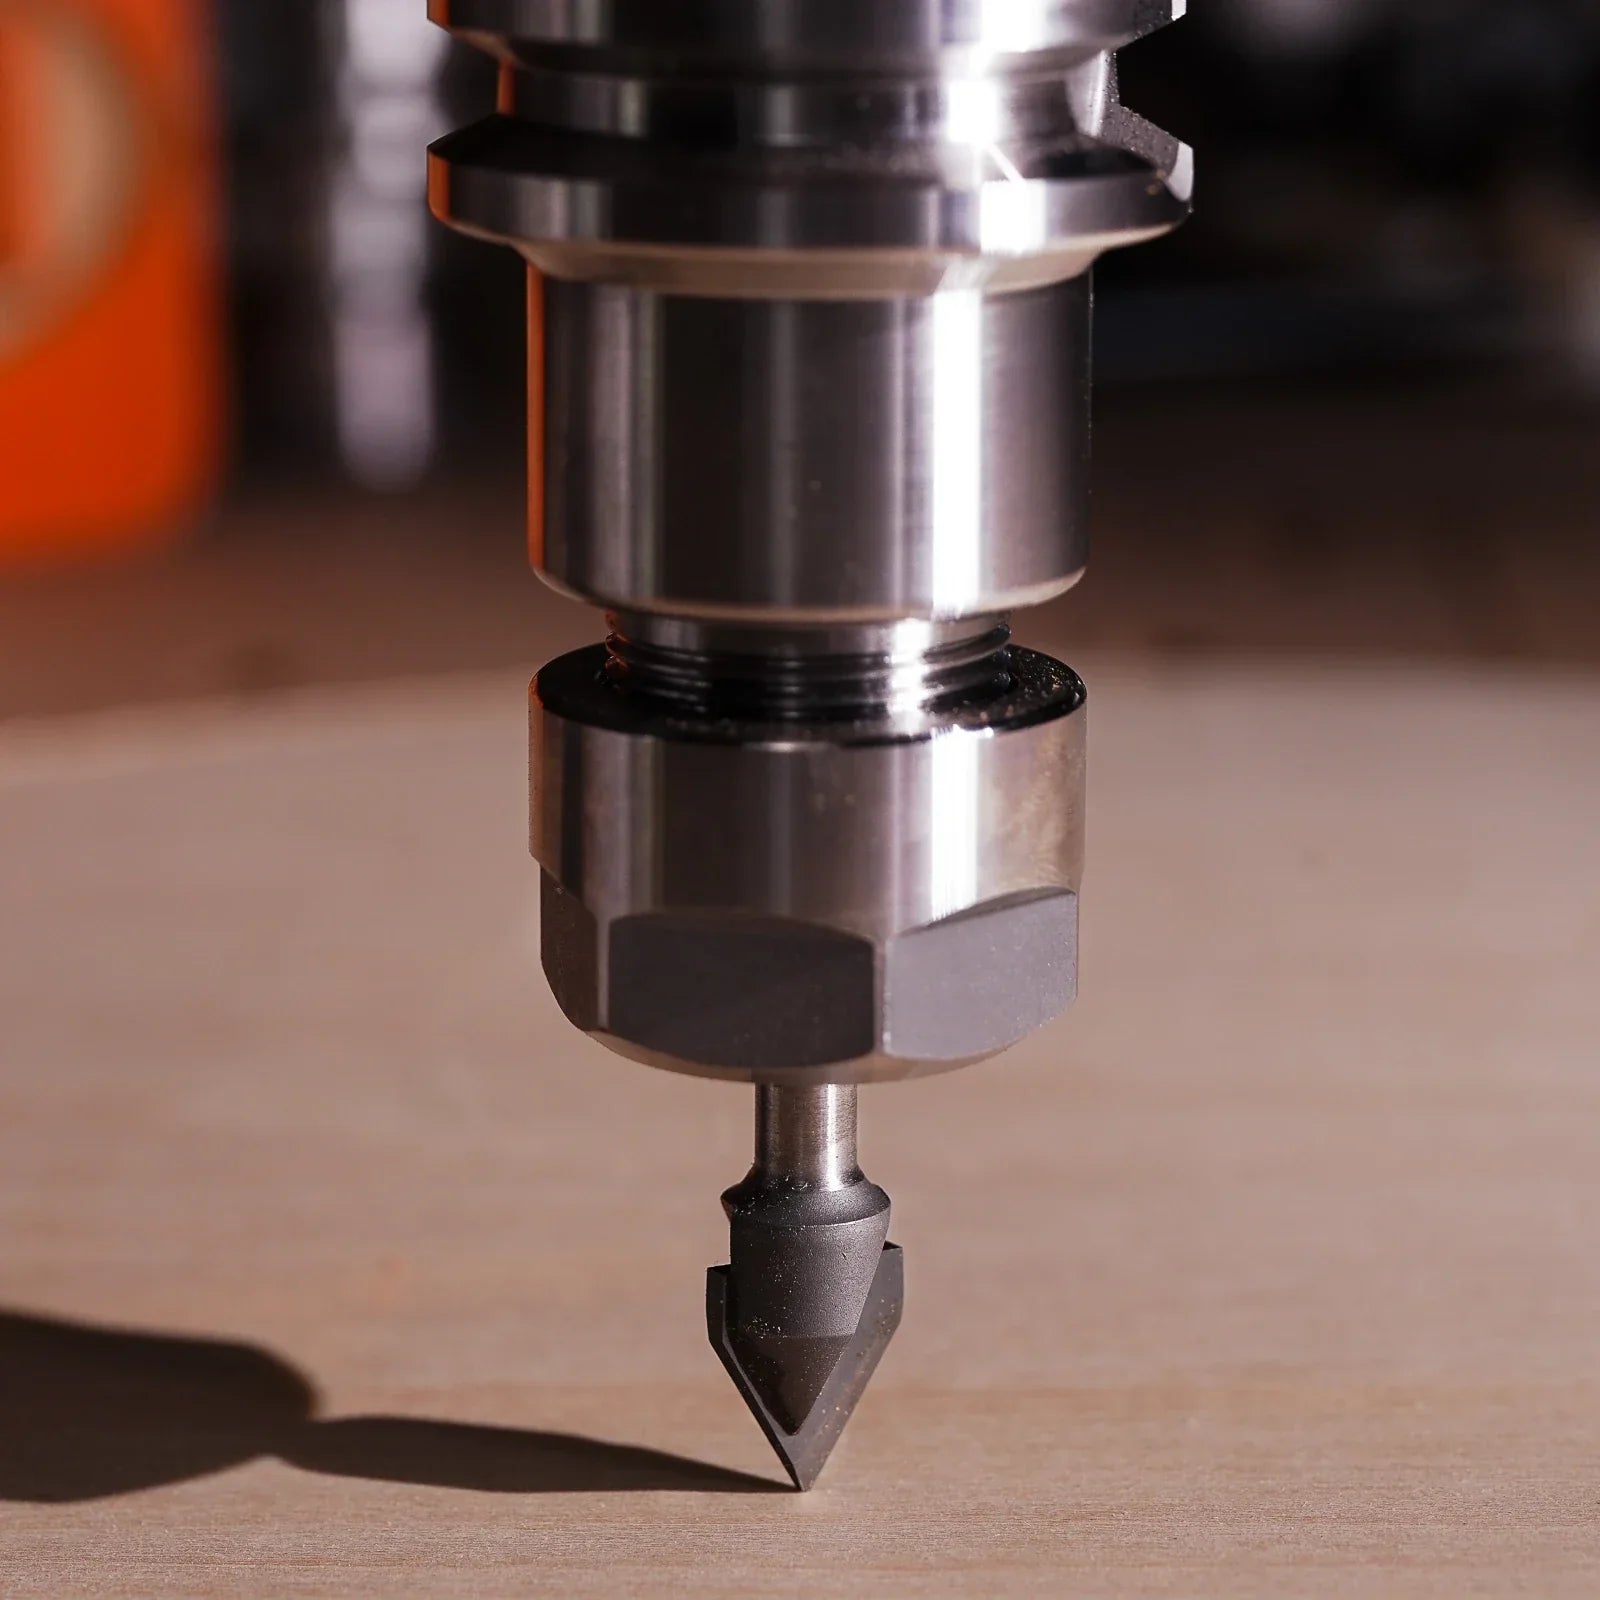 SpeTool V-Groove Carbide Router Bit Chamfer Bits for CNC Woodword